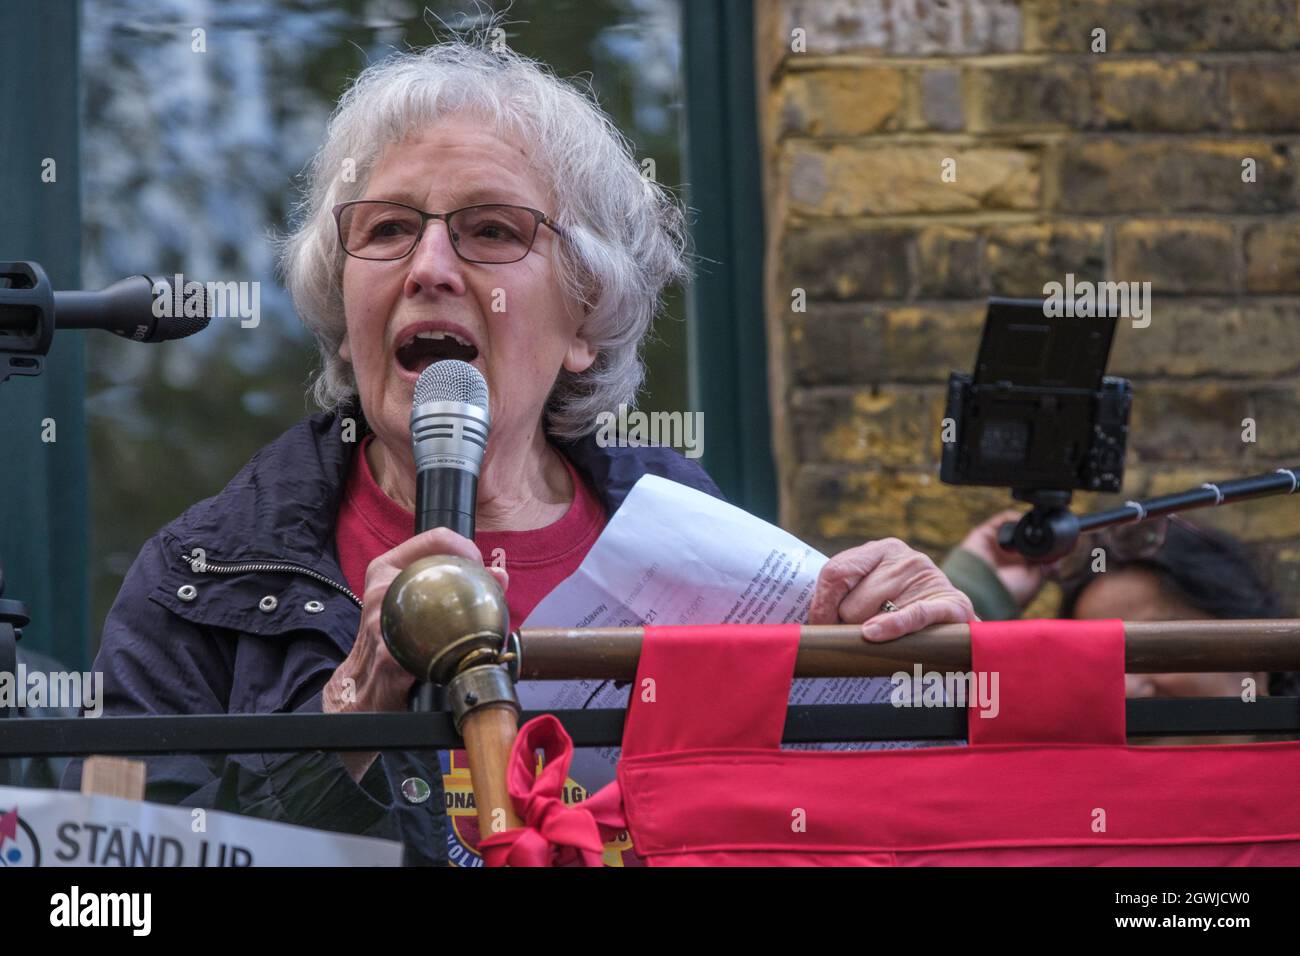 London, UK. 3rd Oct 2021. Marlene Sideaway of the International Brigade Memorial Trust talks about those who went to fight fascism in the Spanish Civil War at the rally on the 85th anniversary of the Battle of Cable St to remember the act of unity against the fascist threat when the Jewish and Irish communities of East London and their allies blocked the streets to prevent Oswald Mosley and his British Union of Fascists marching through. They marched from Dock St along Cable St to a rally next to the mural in St George's Gardens chaired by Jewish historian David Rosenberg and local Bengali act Stock Photo